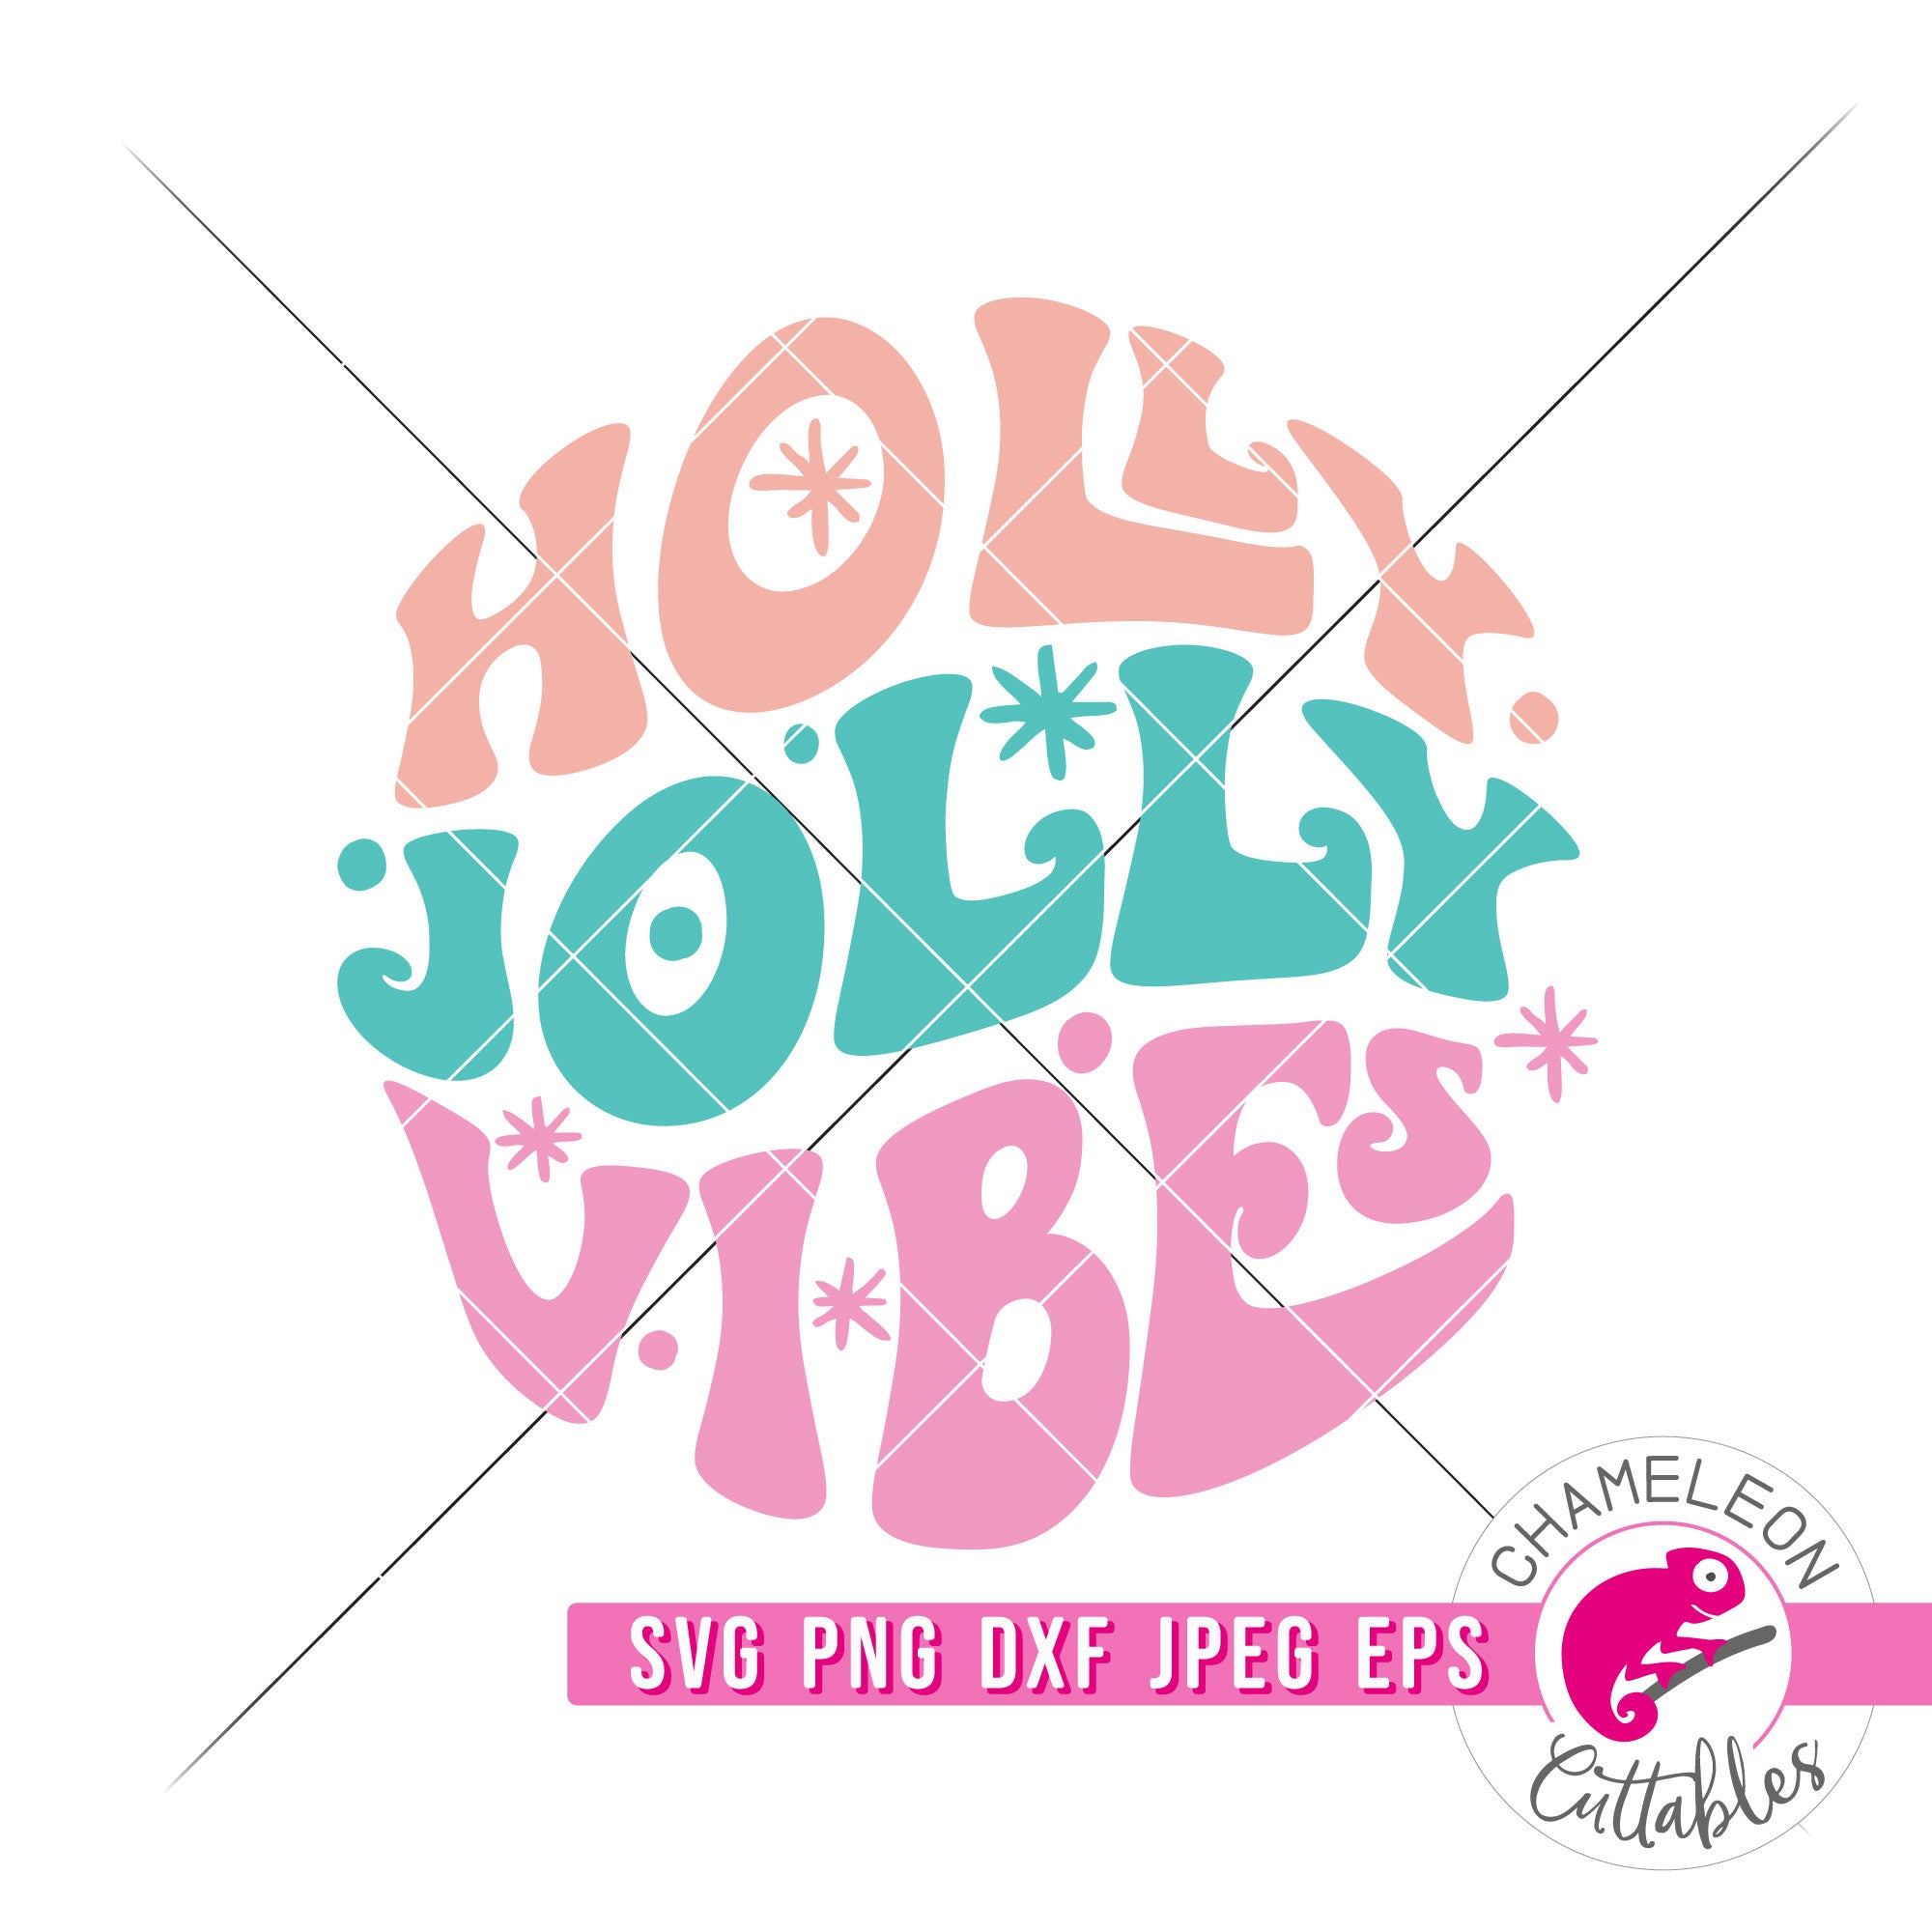 Holly Jolly Vibes T-Shirt Design ,Holly Jolly Vibes SVG Cut File